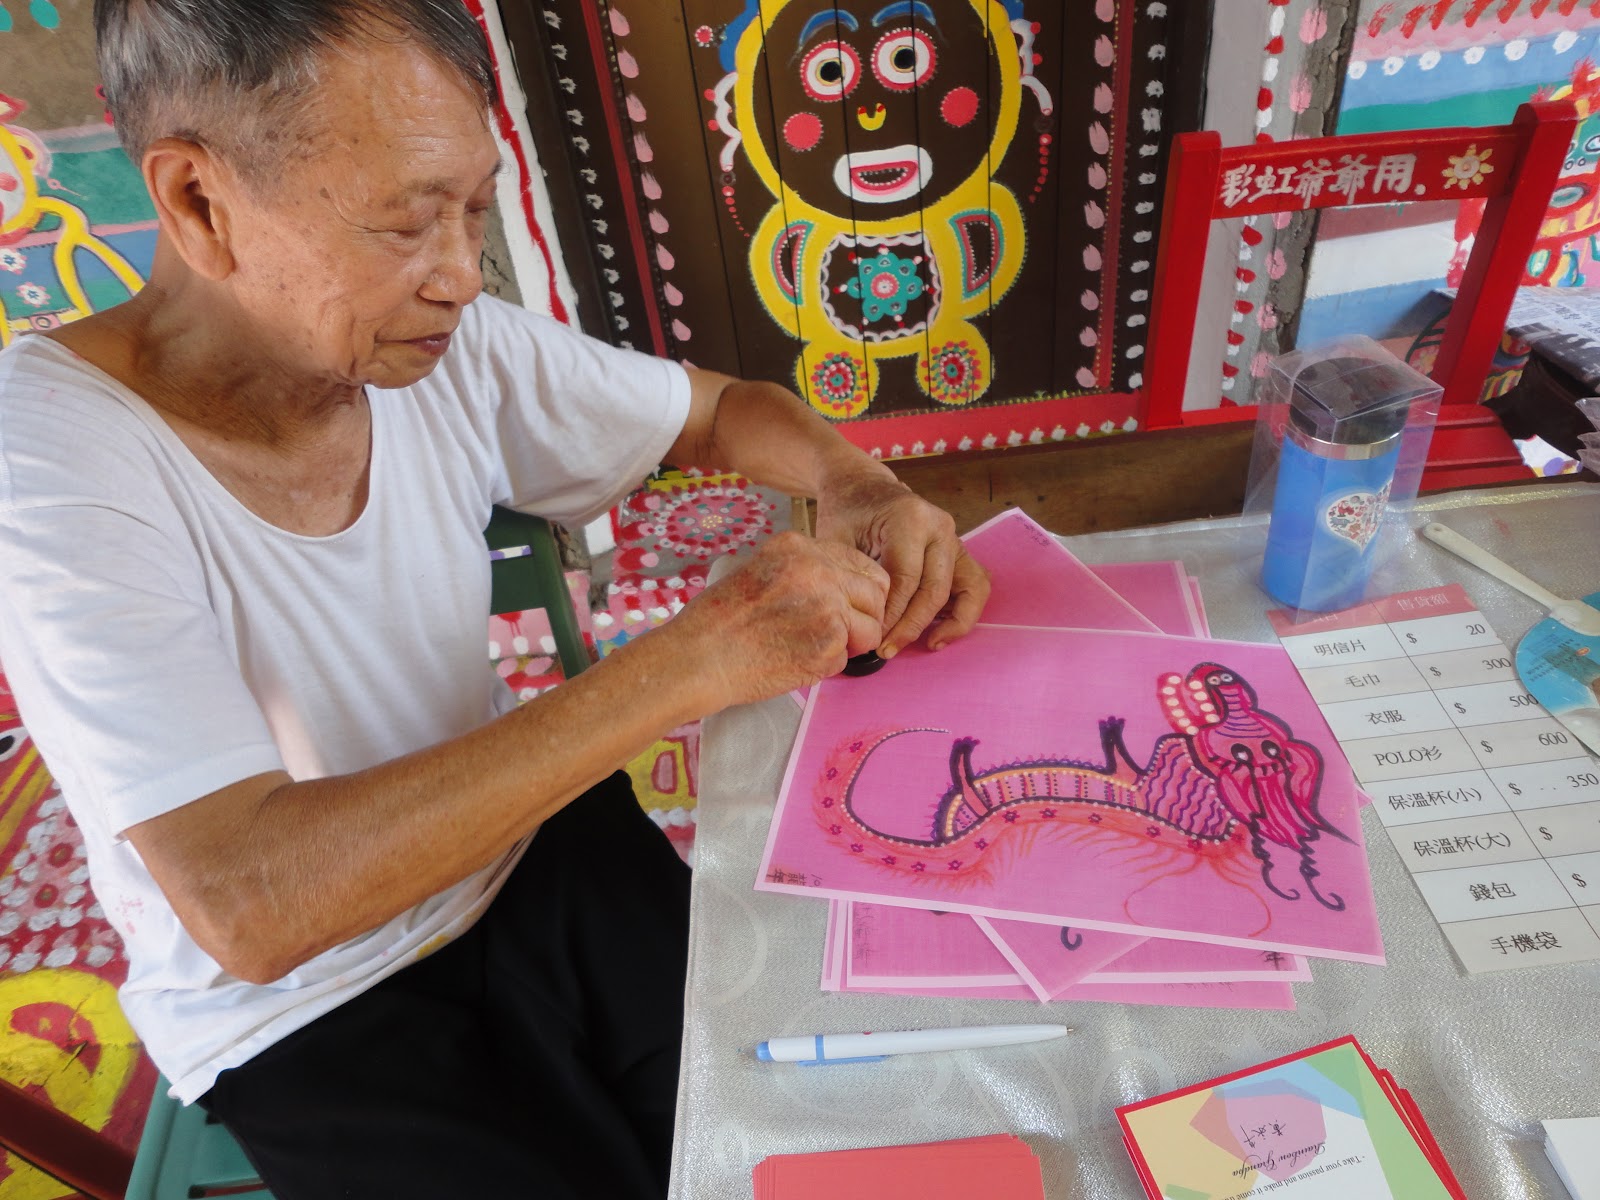 An Entire Community in Taiwan Hand-Painted by a Single Man